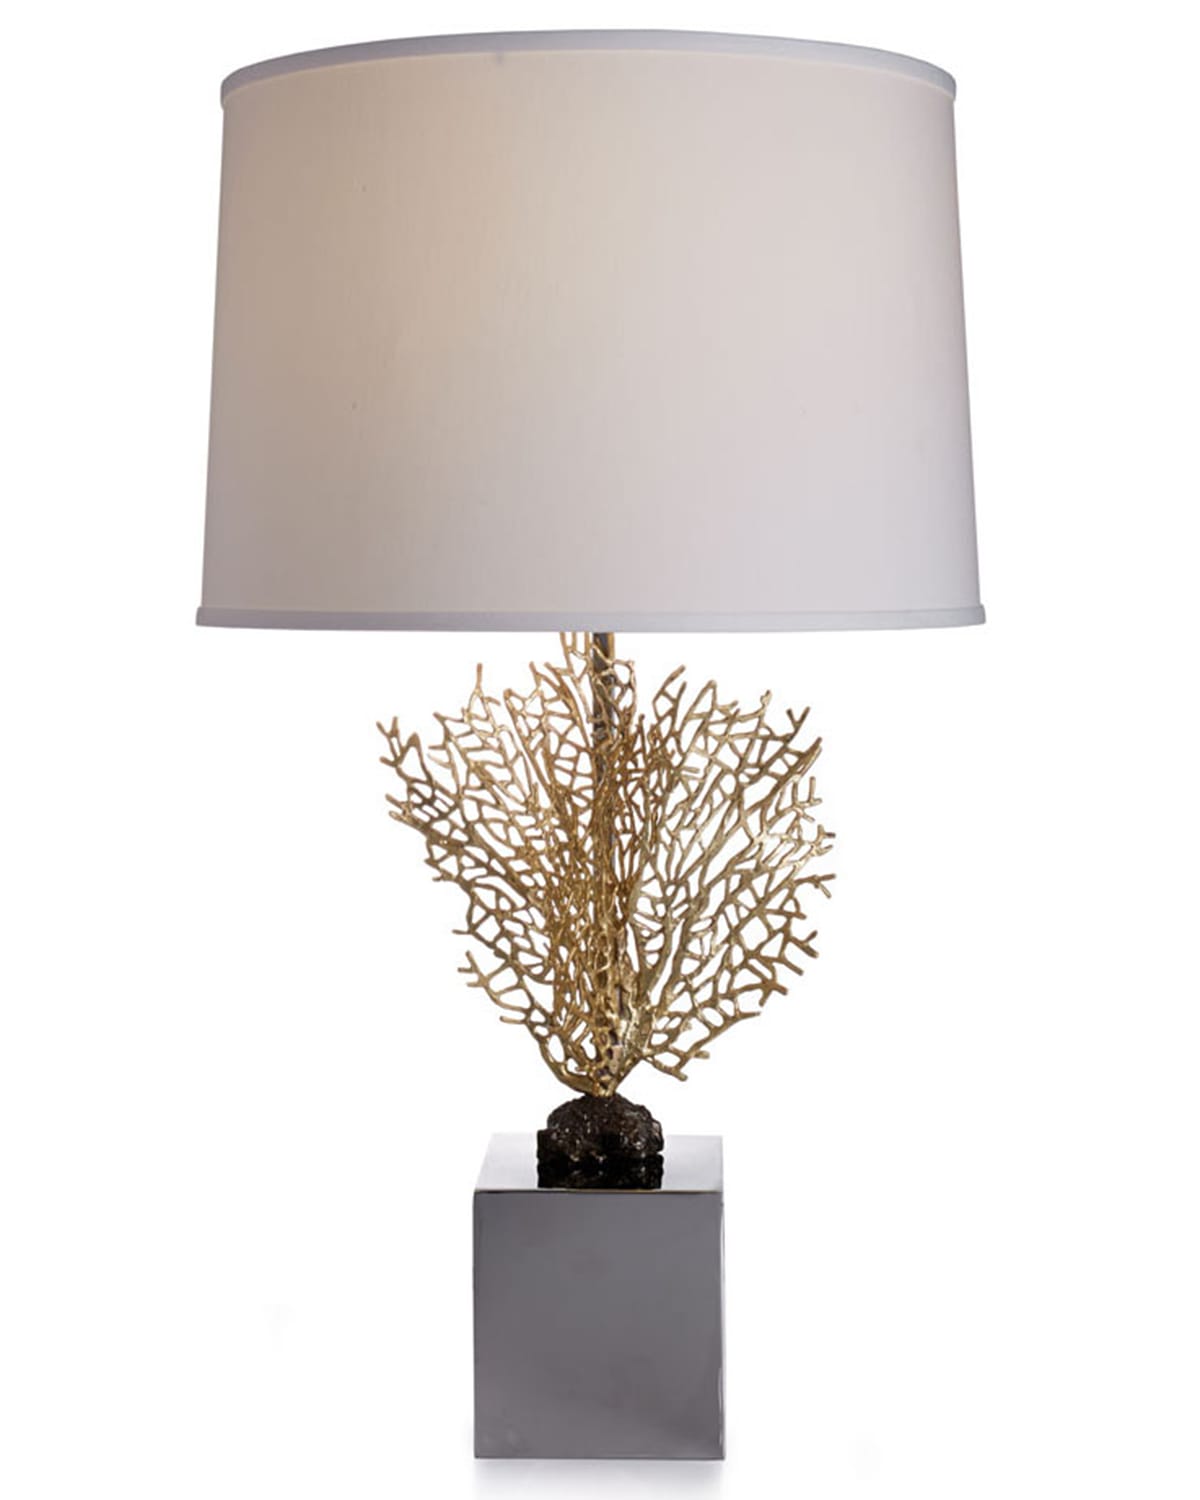 Fan Coral Table Lamp